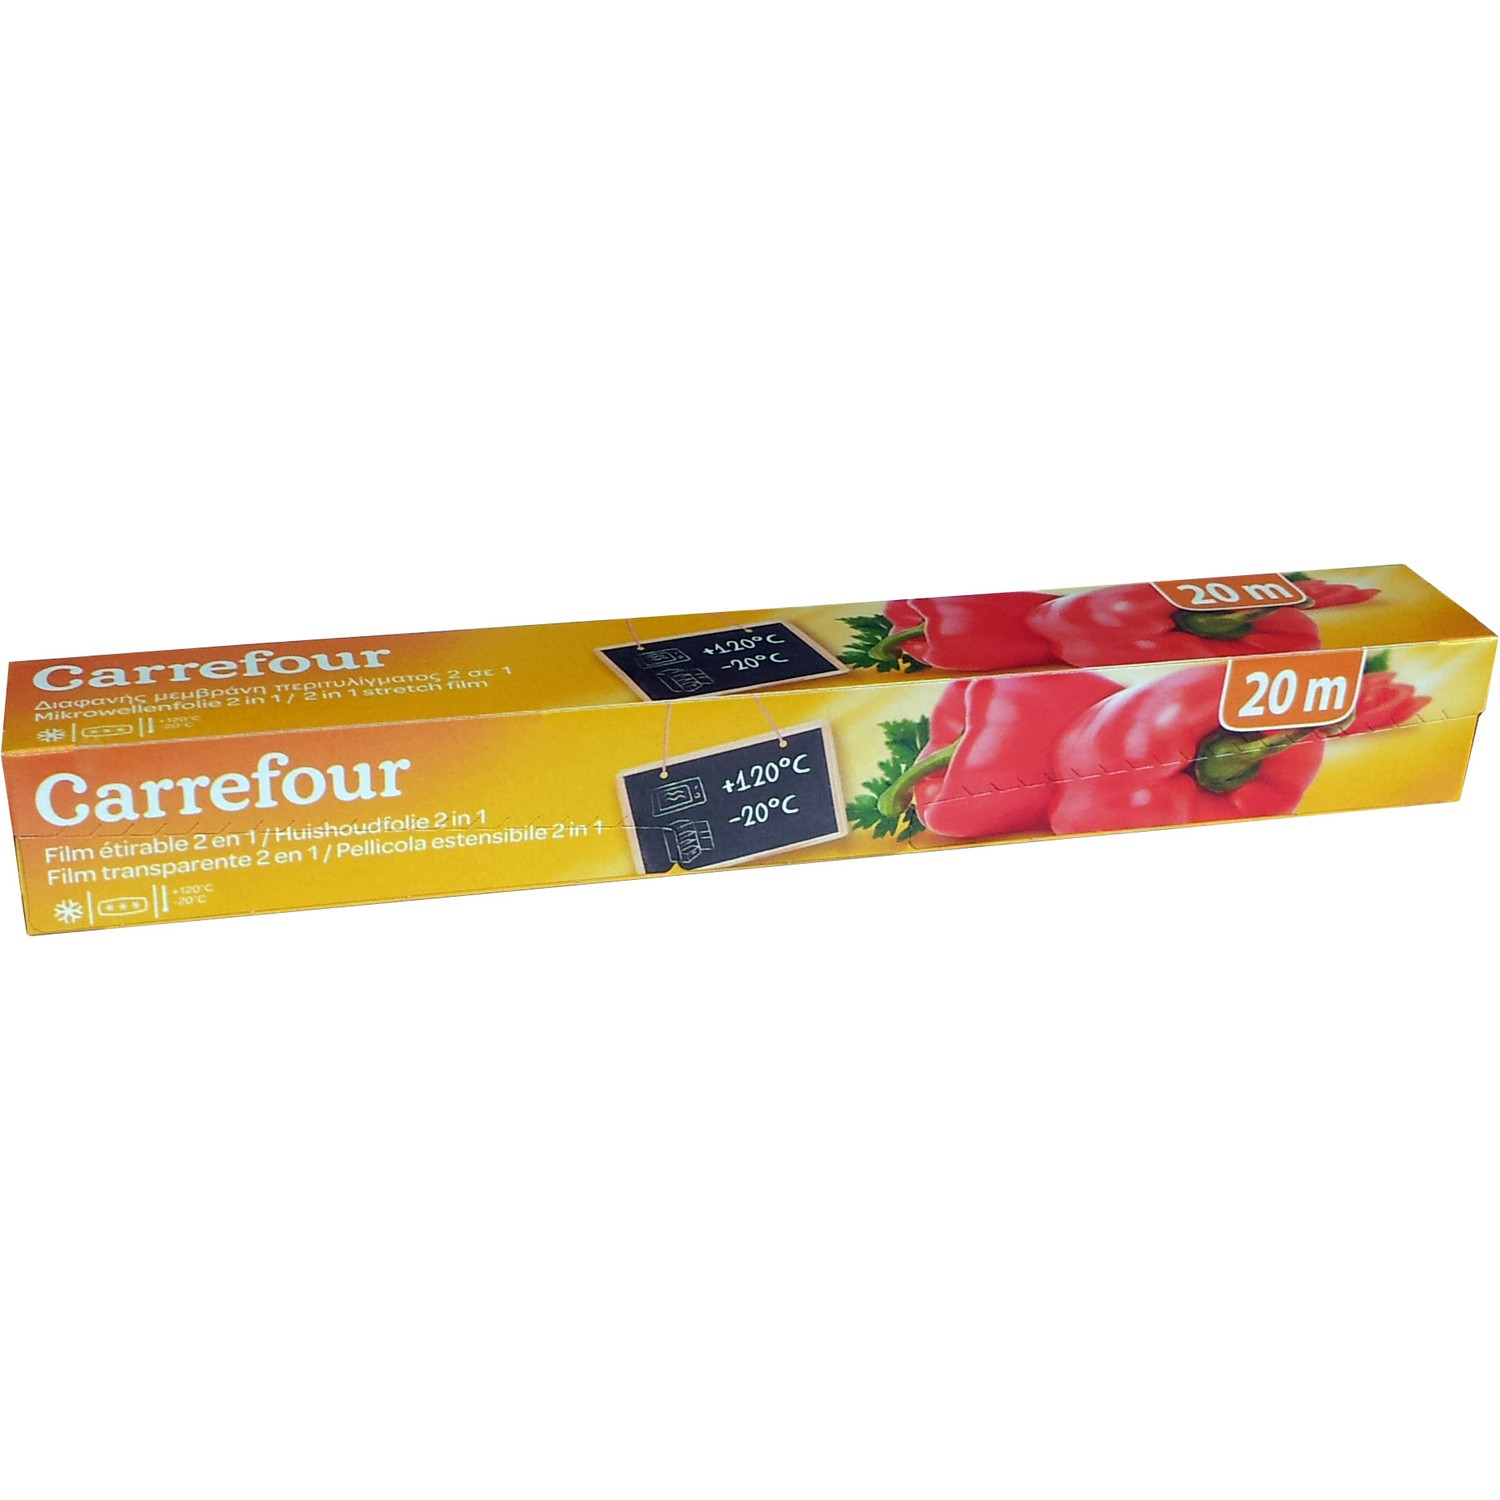 Film Etirable Alimentaire 20M 2En1 Carrefour – Carrefour on Board